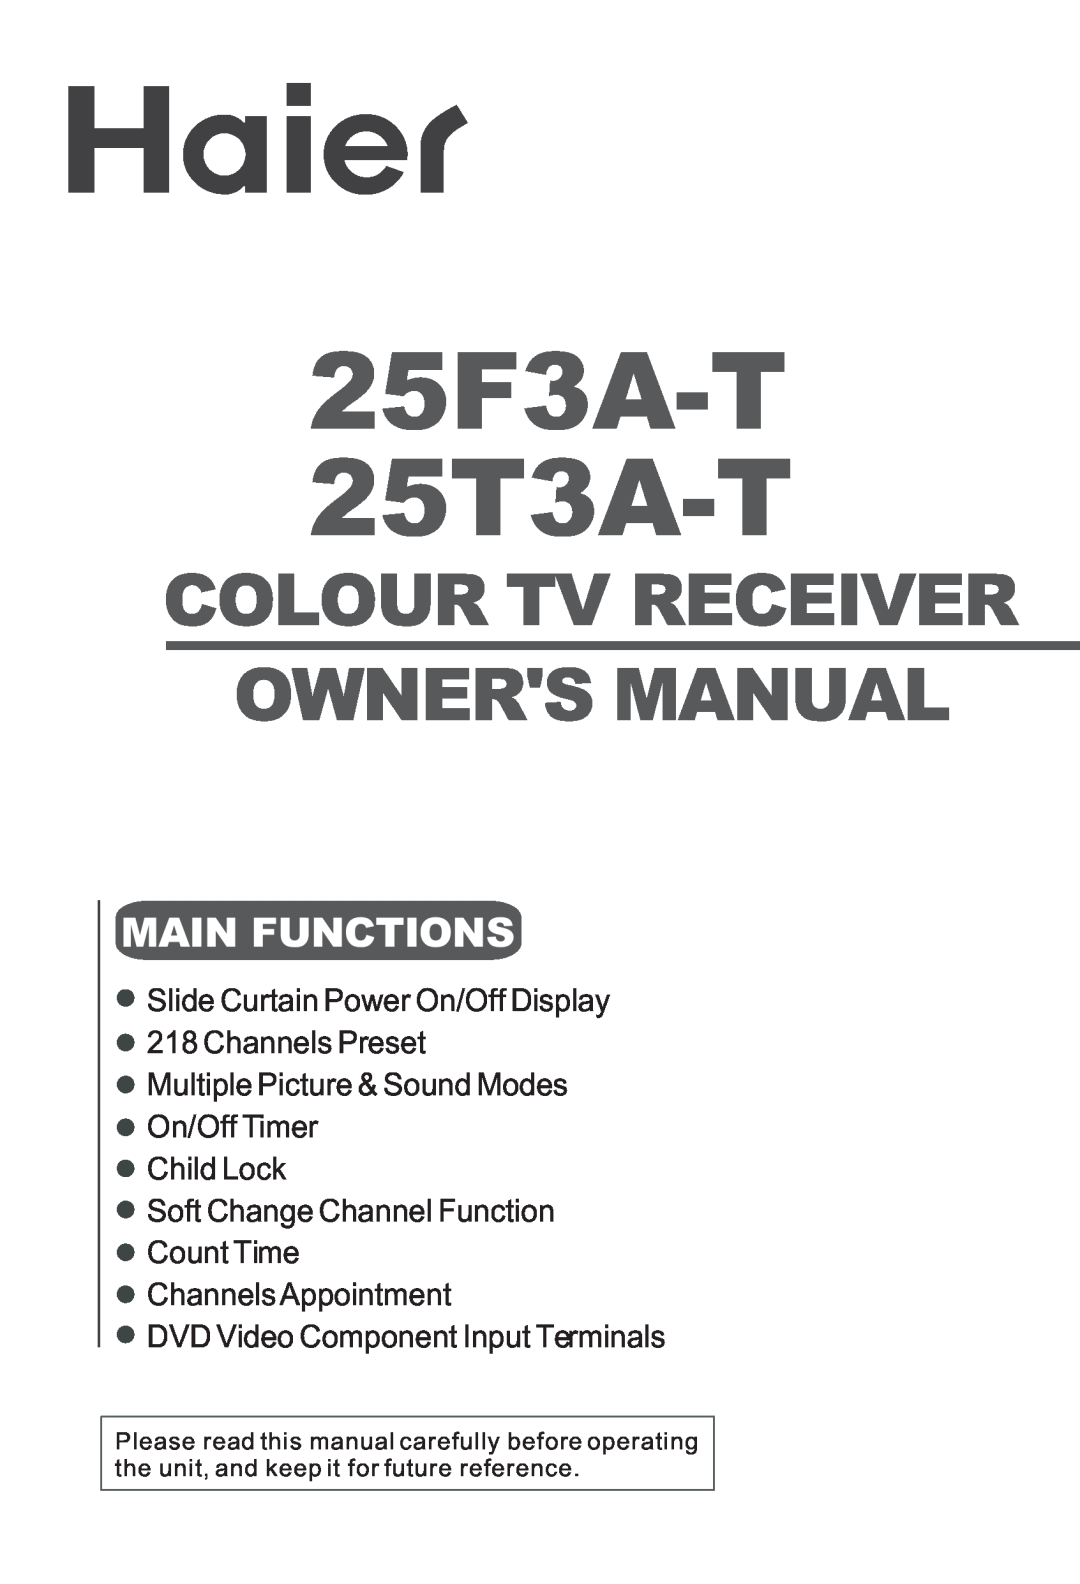 Haier 25F3A-T owner manual Slide Curtain Power On/Off Display 218 Channels Preset, DVD Video Component Input Terminals 